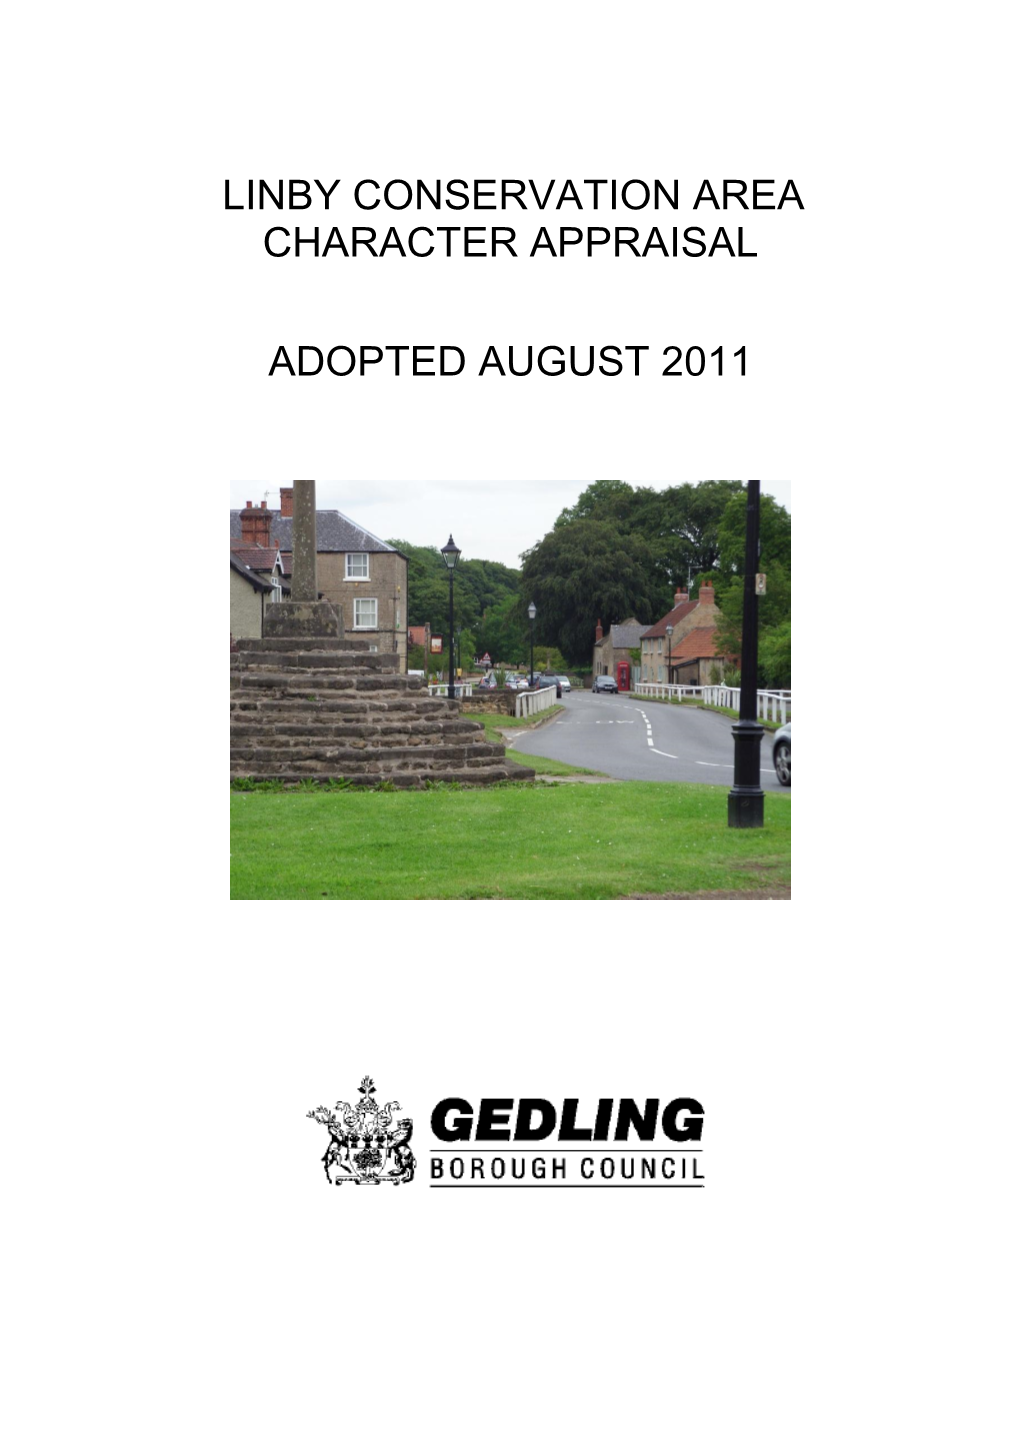 Linby Conservation Area Character Appraisal